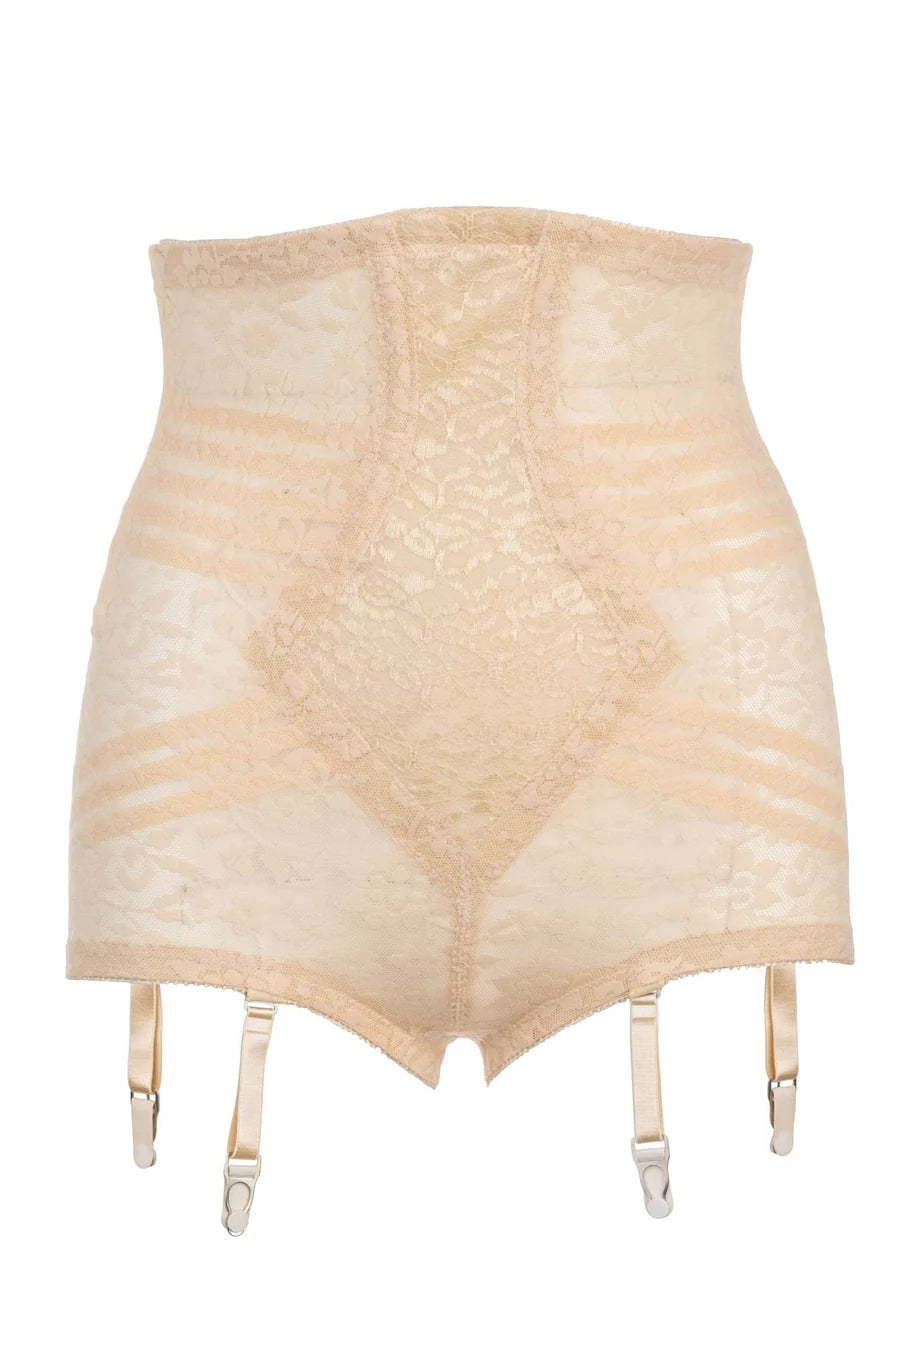 RAGO SHAPEWEAR - 6107 - High Waist Extra Firm Shaping Panty Brief - Beige Size M/28 to 3X/36